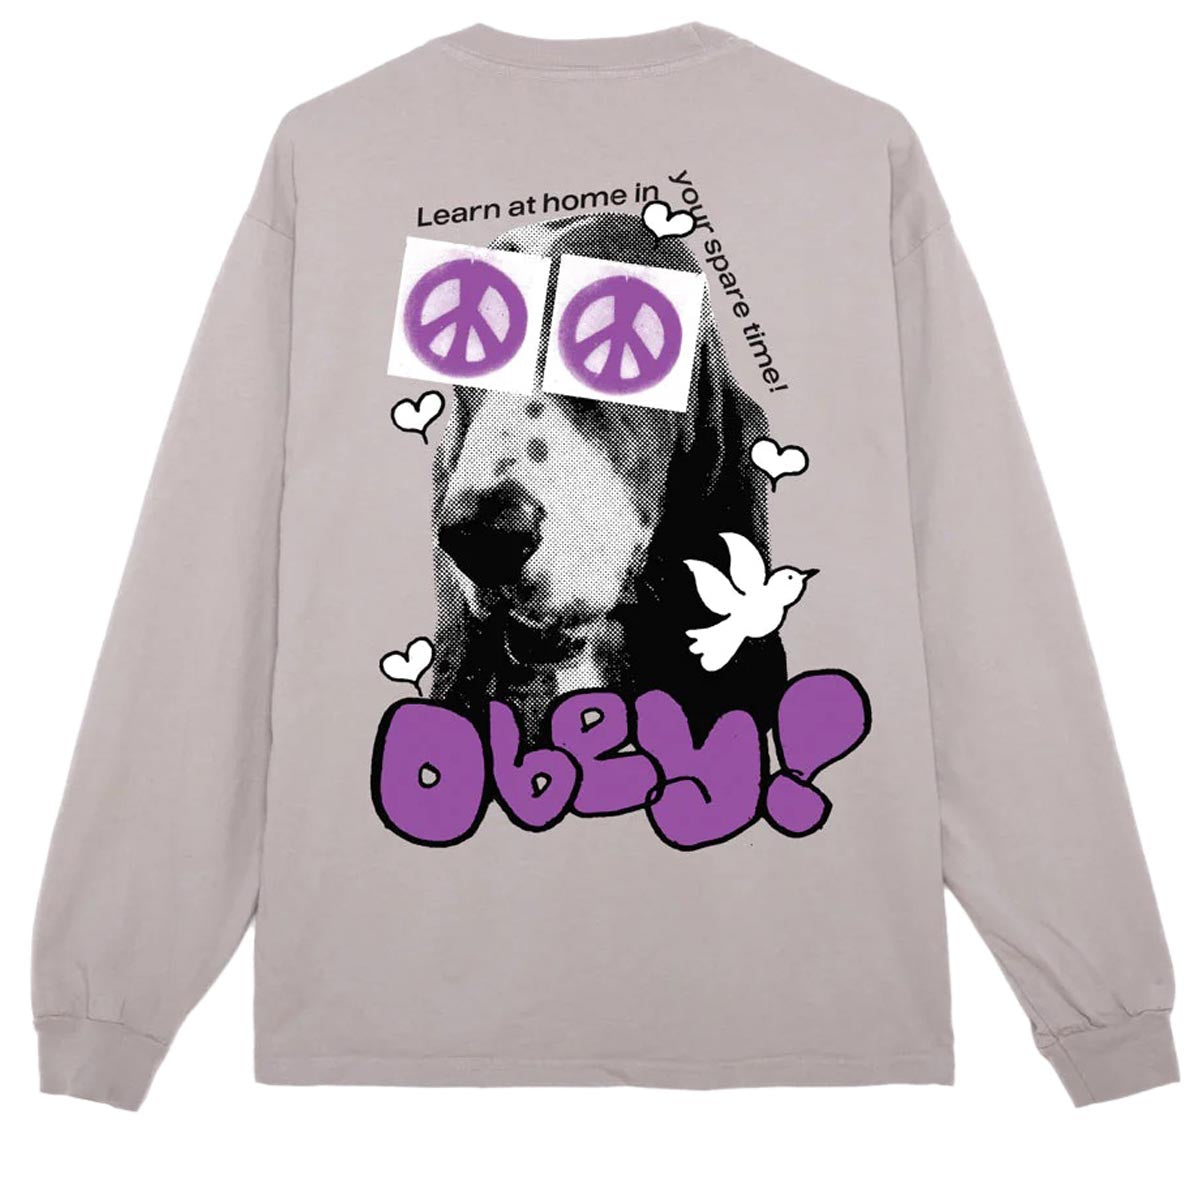 Obey Peace Eyes Long Sleeve T-Shirt - Silver Grey image 1